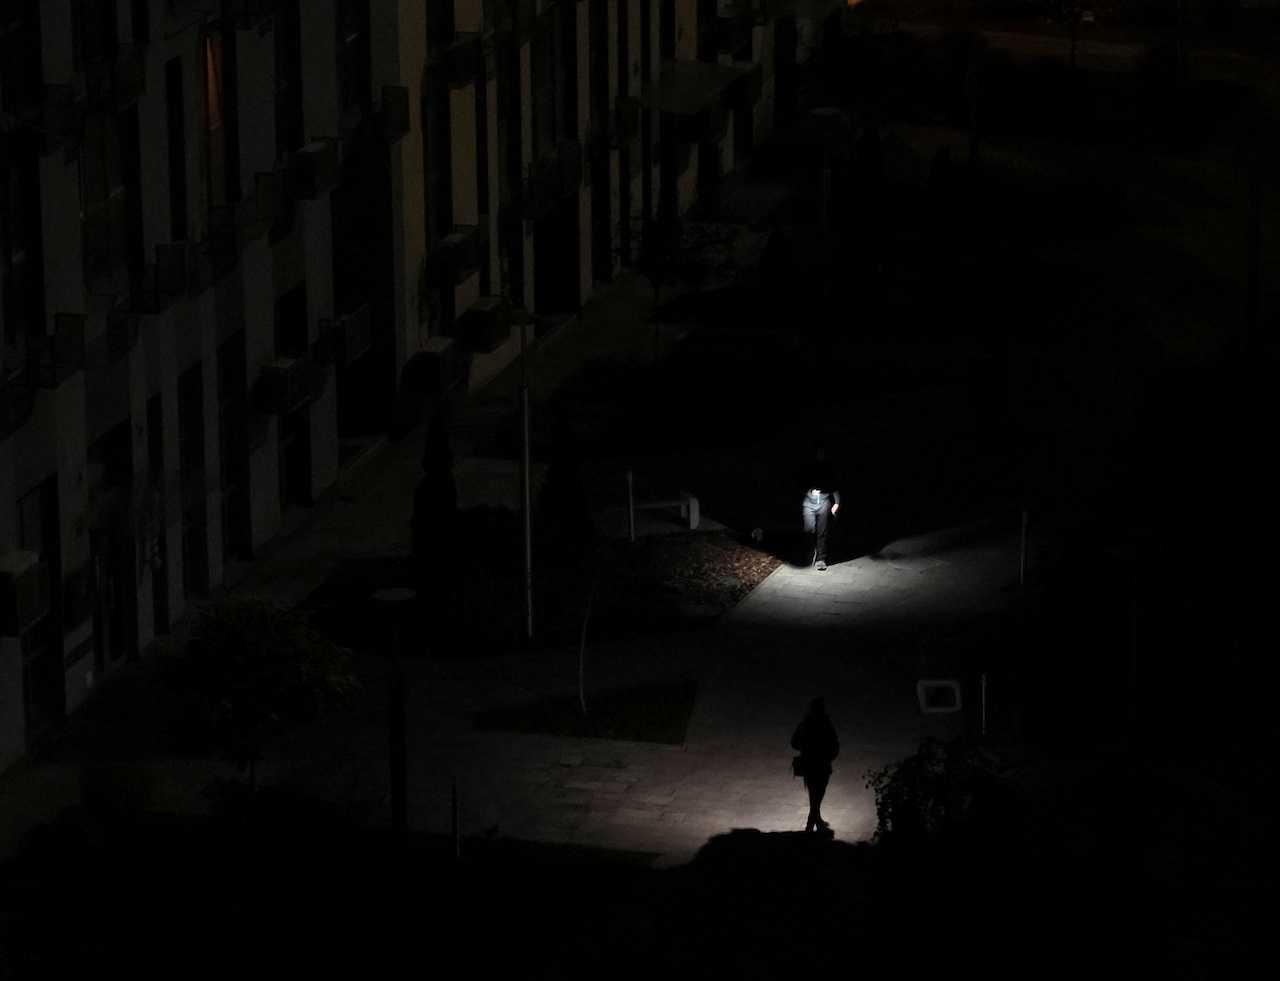 Residents light their way as they walk in the yard of an apartment building during a power outage after critical civil infrastructure was hit by Russian missile attacks in Ukraine, in Kyiv, Ukraine, Nov 9. Photo: Reuters